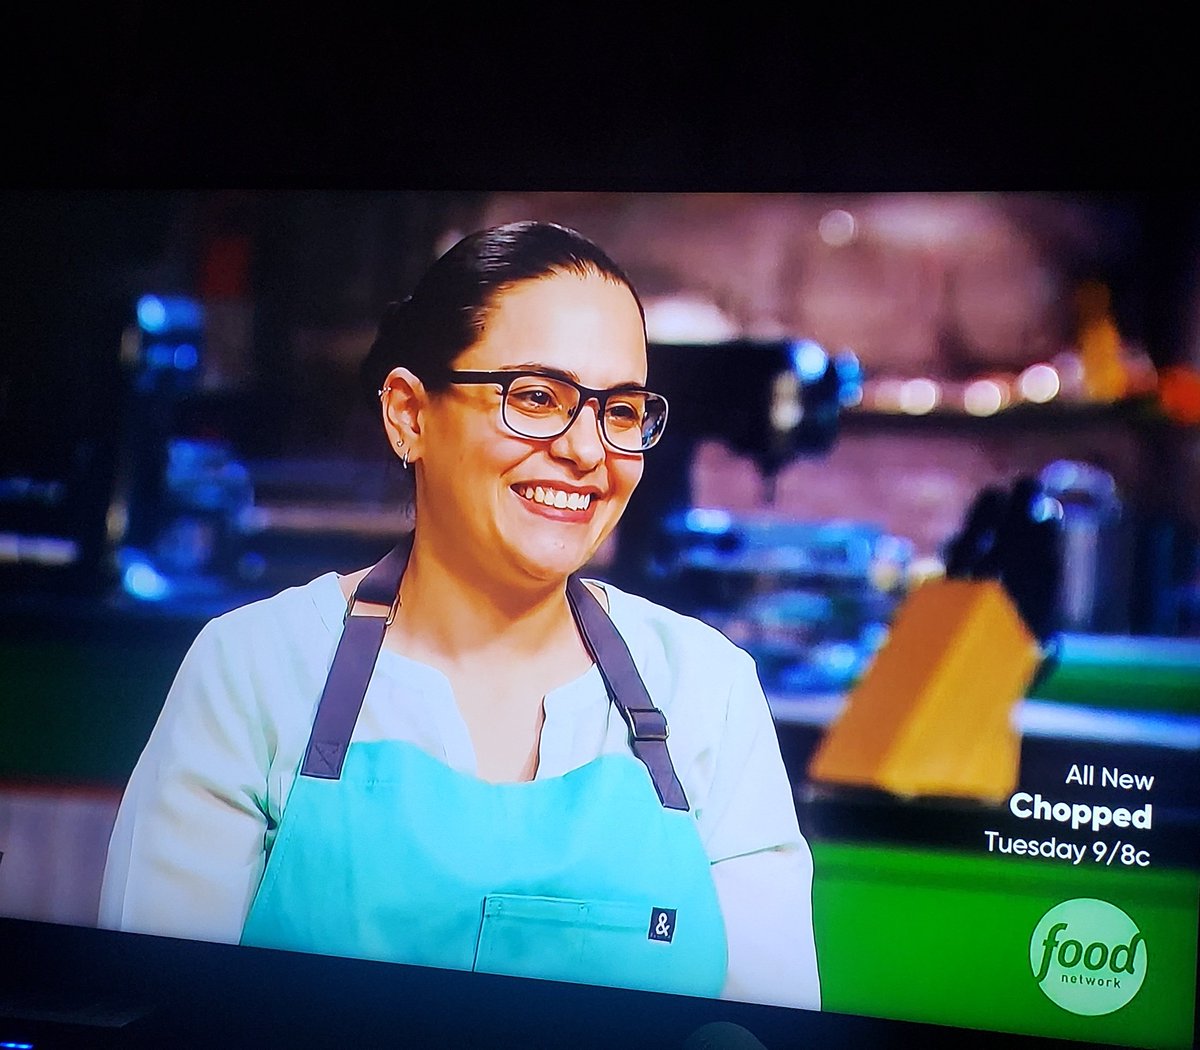 Just look at my @TinyChefAsher !!!

My whole heart is full seeing her on my TV doing what she loves most.

#thatsmybestie
#tinychef
#myBeller